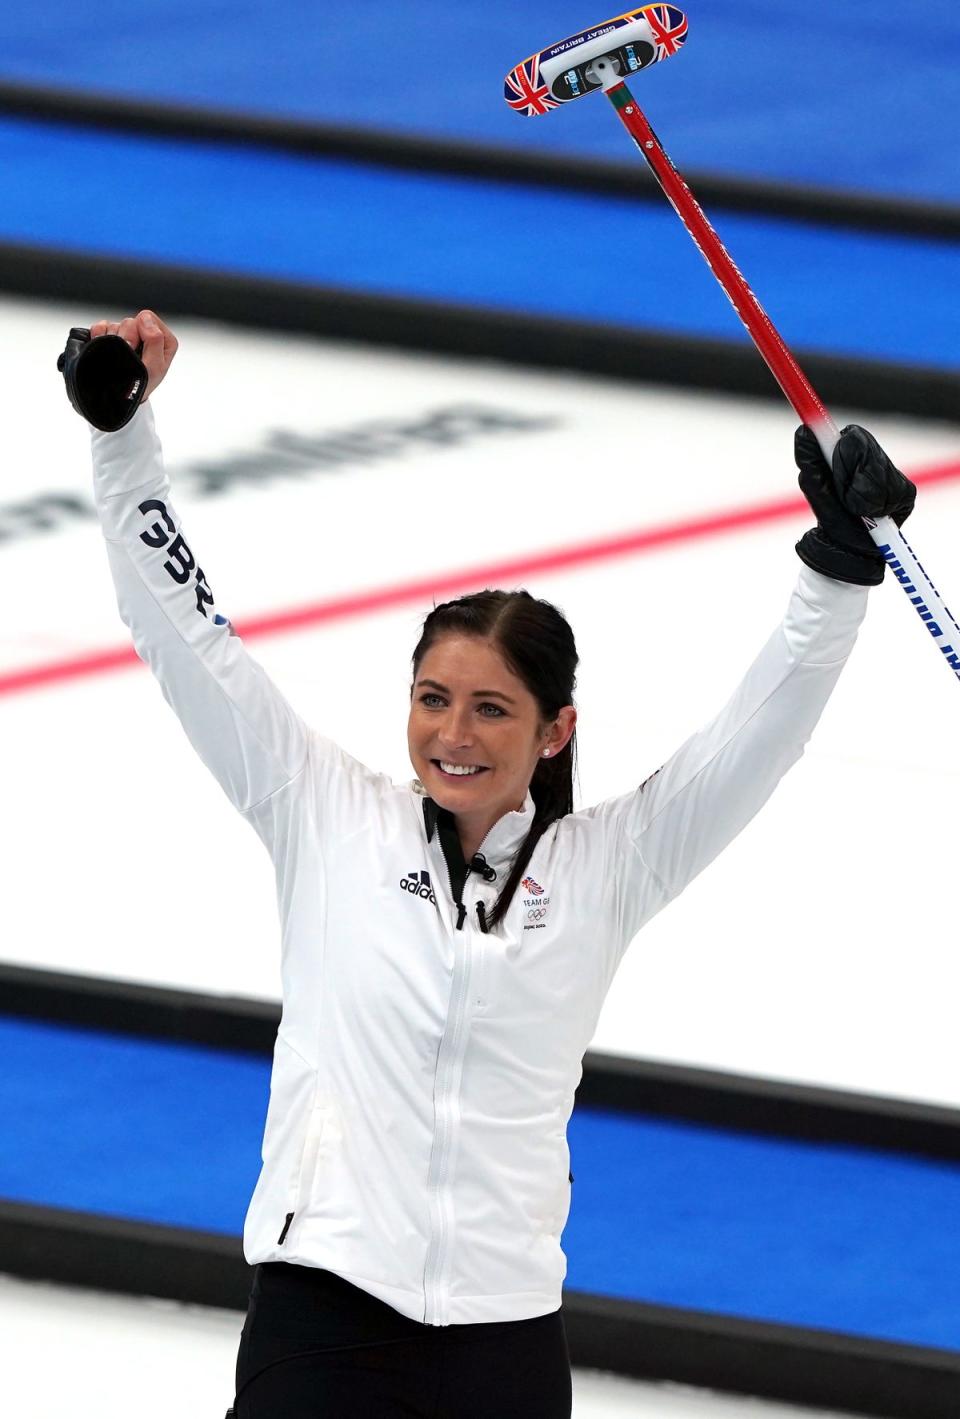 Eve Muirhead received some cycling tips (Andrew Milligan/PA) (PA Wire)